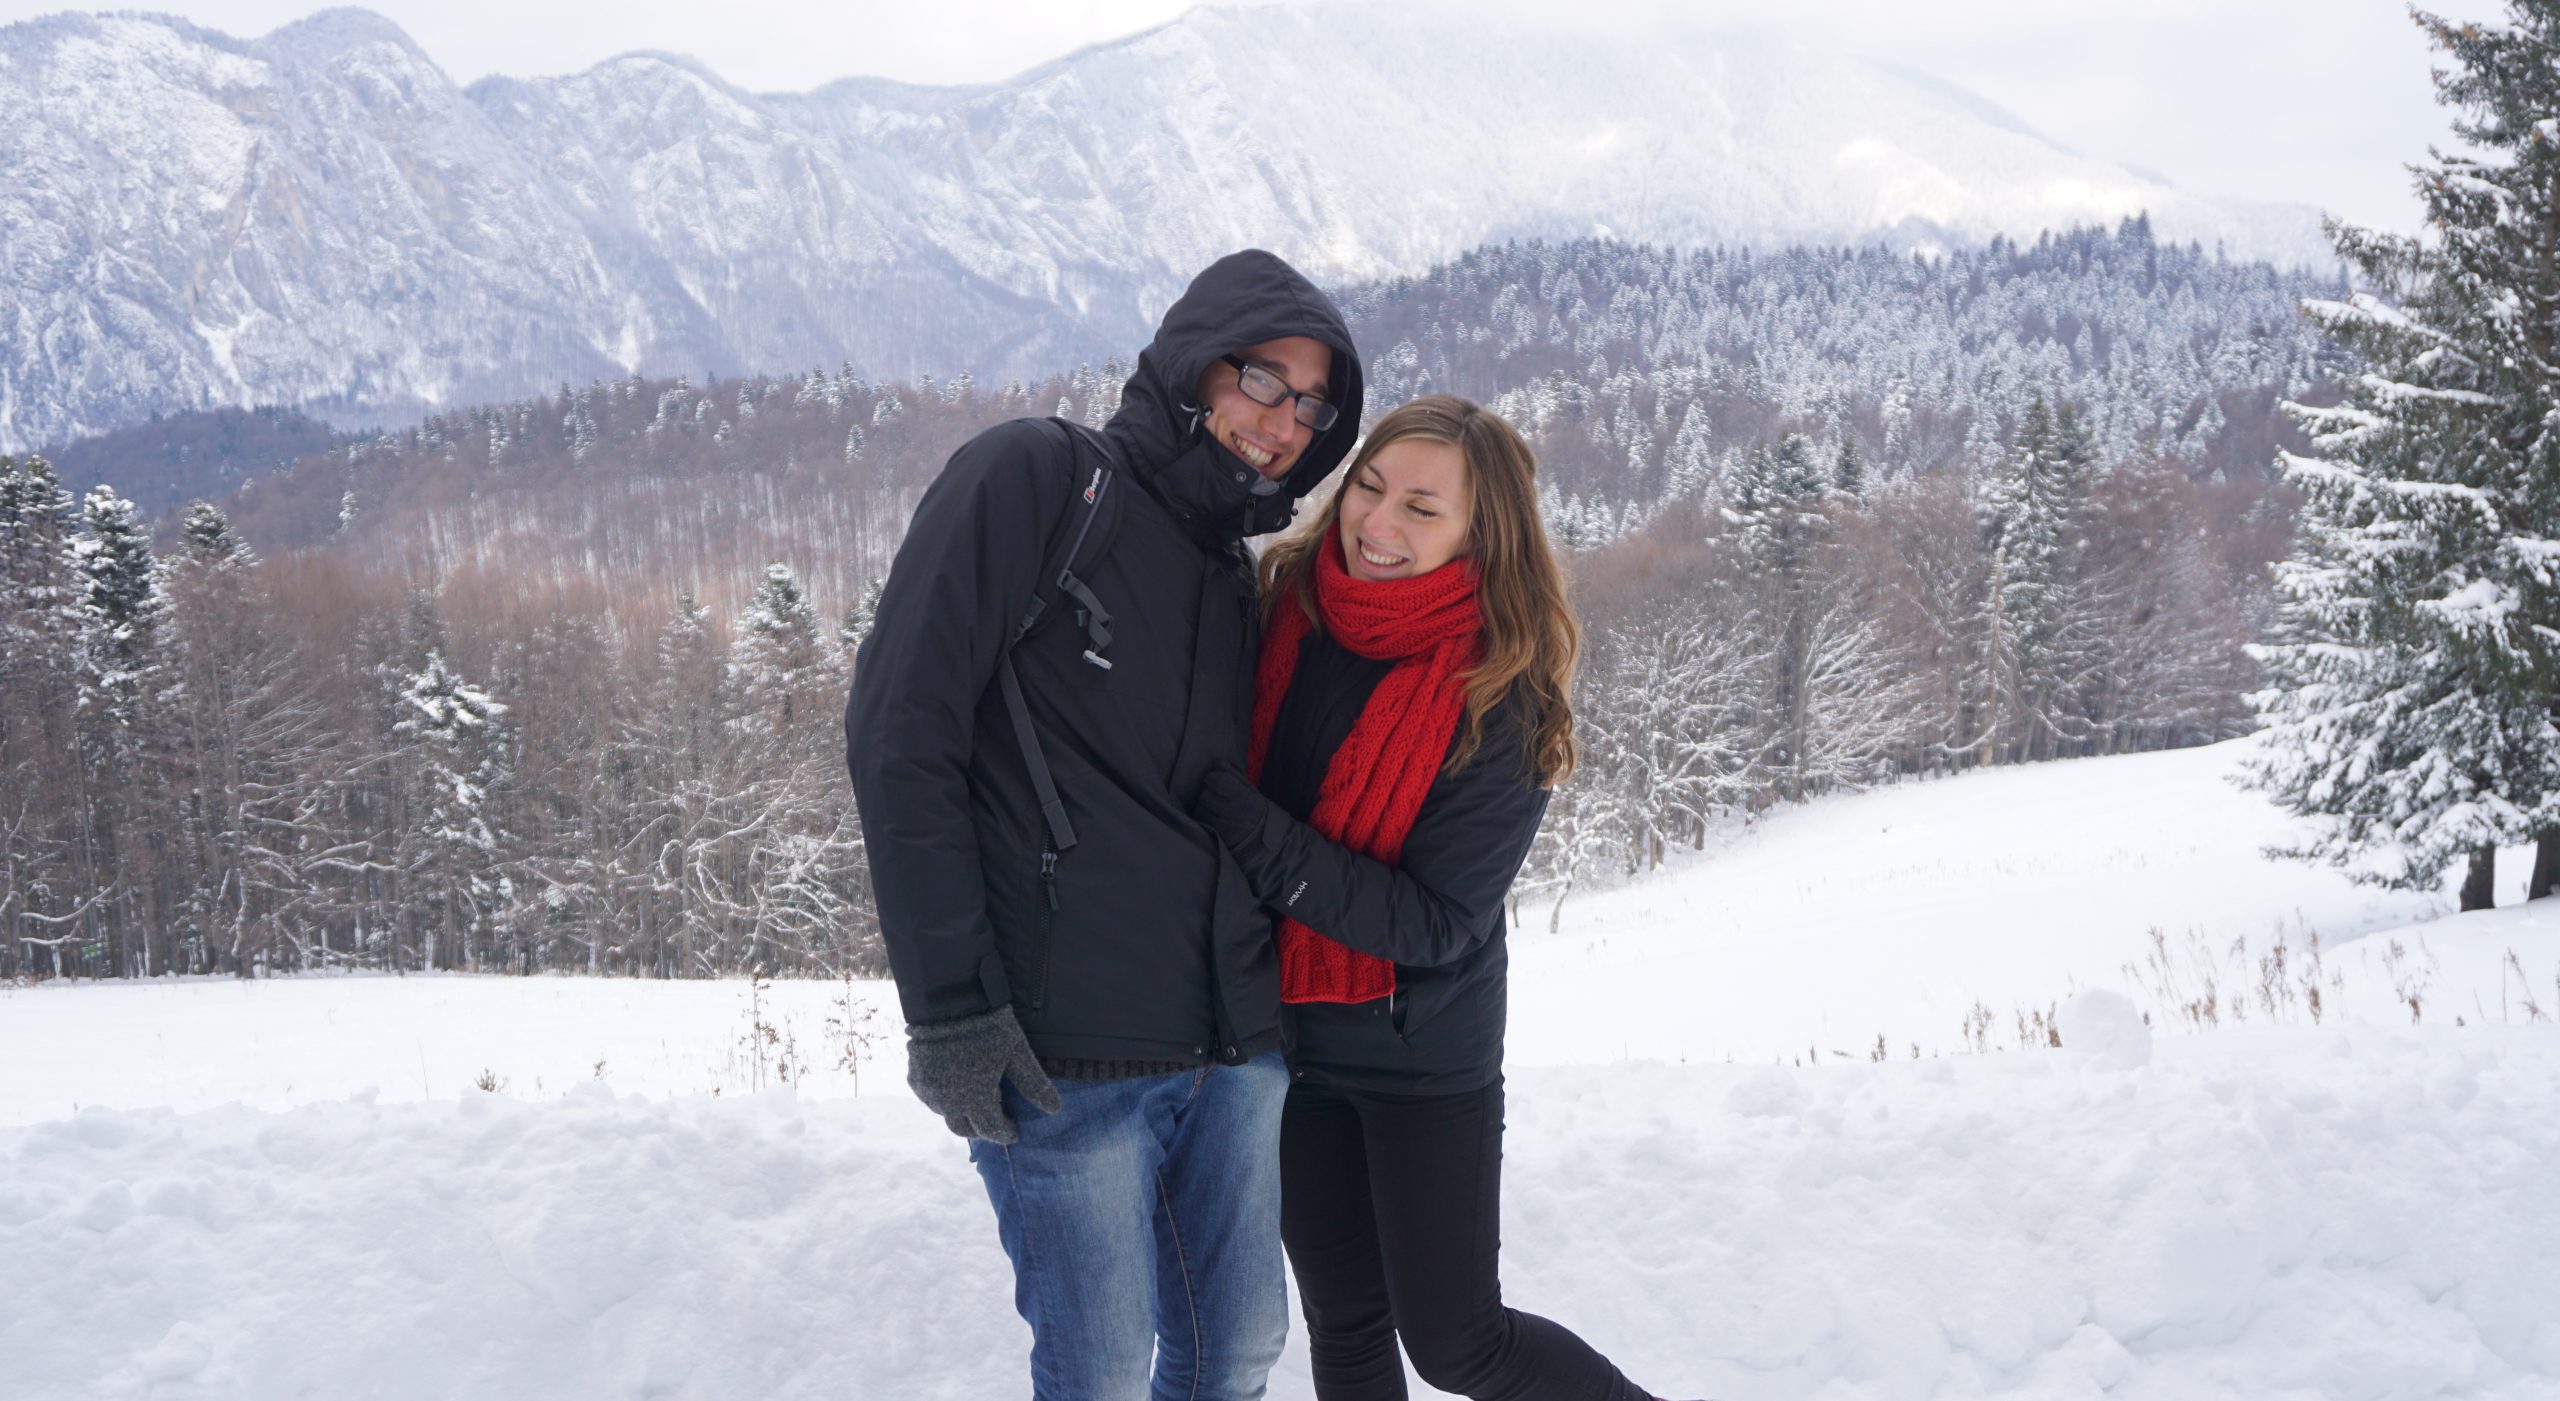 Cory and G in the mountains - enjoying the winter Romanian weather with snow